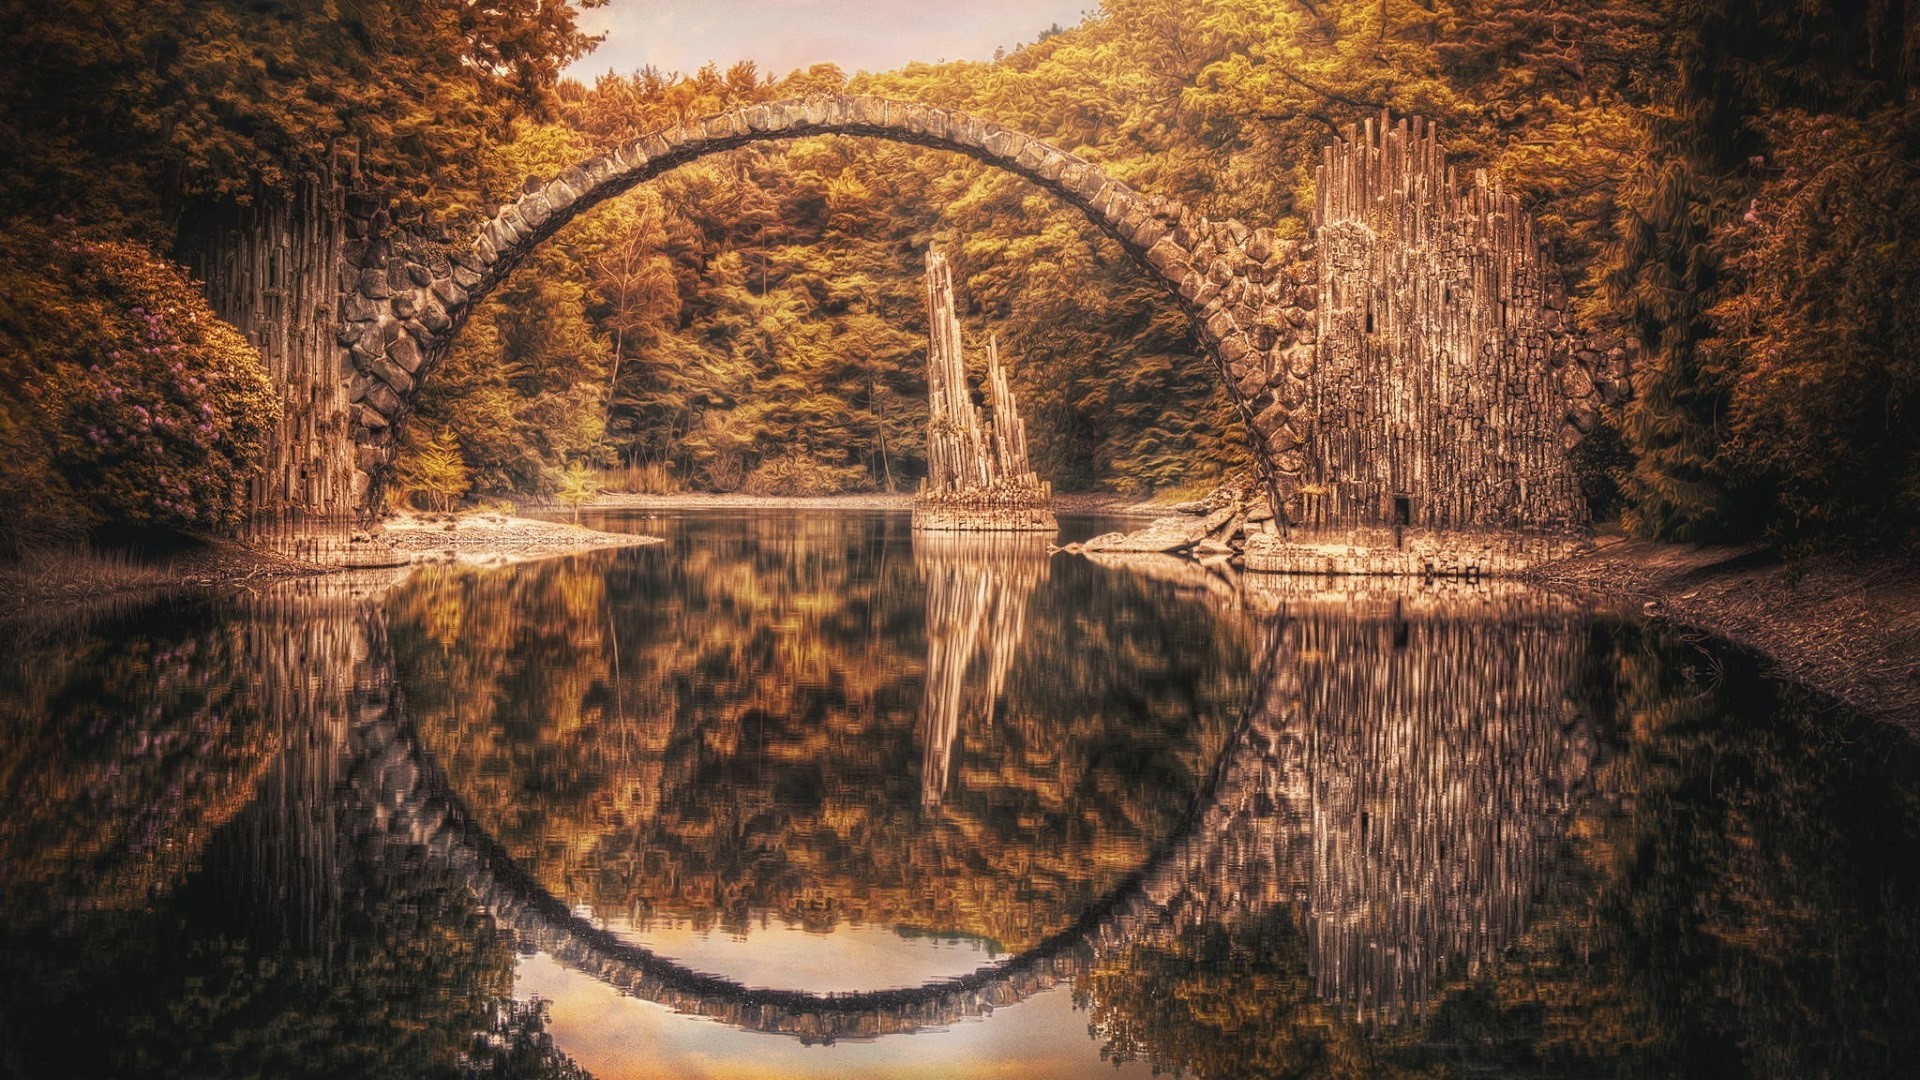 Landscape HDR Reflection Nature Bridge Rock Formation Rock Water Calm River Fall Trees Forest German 1920x1080